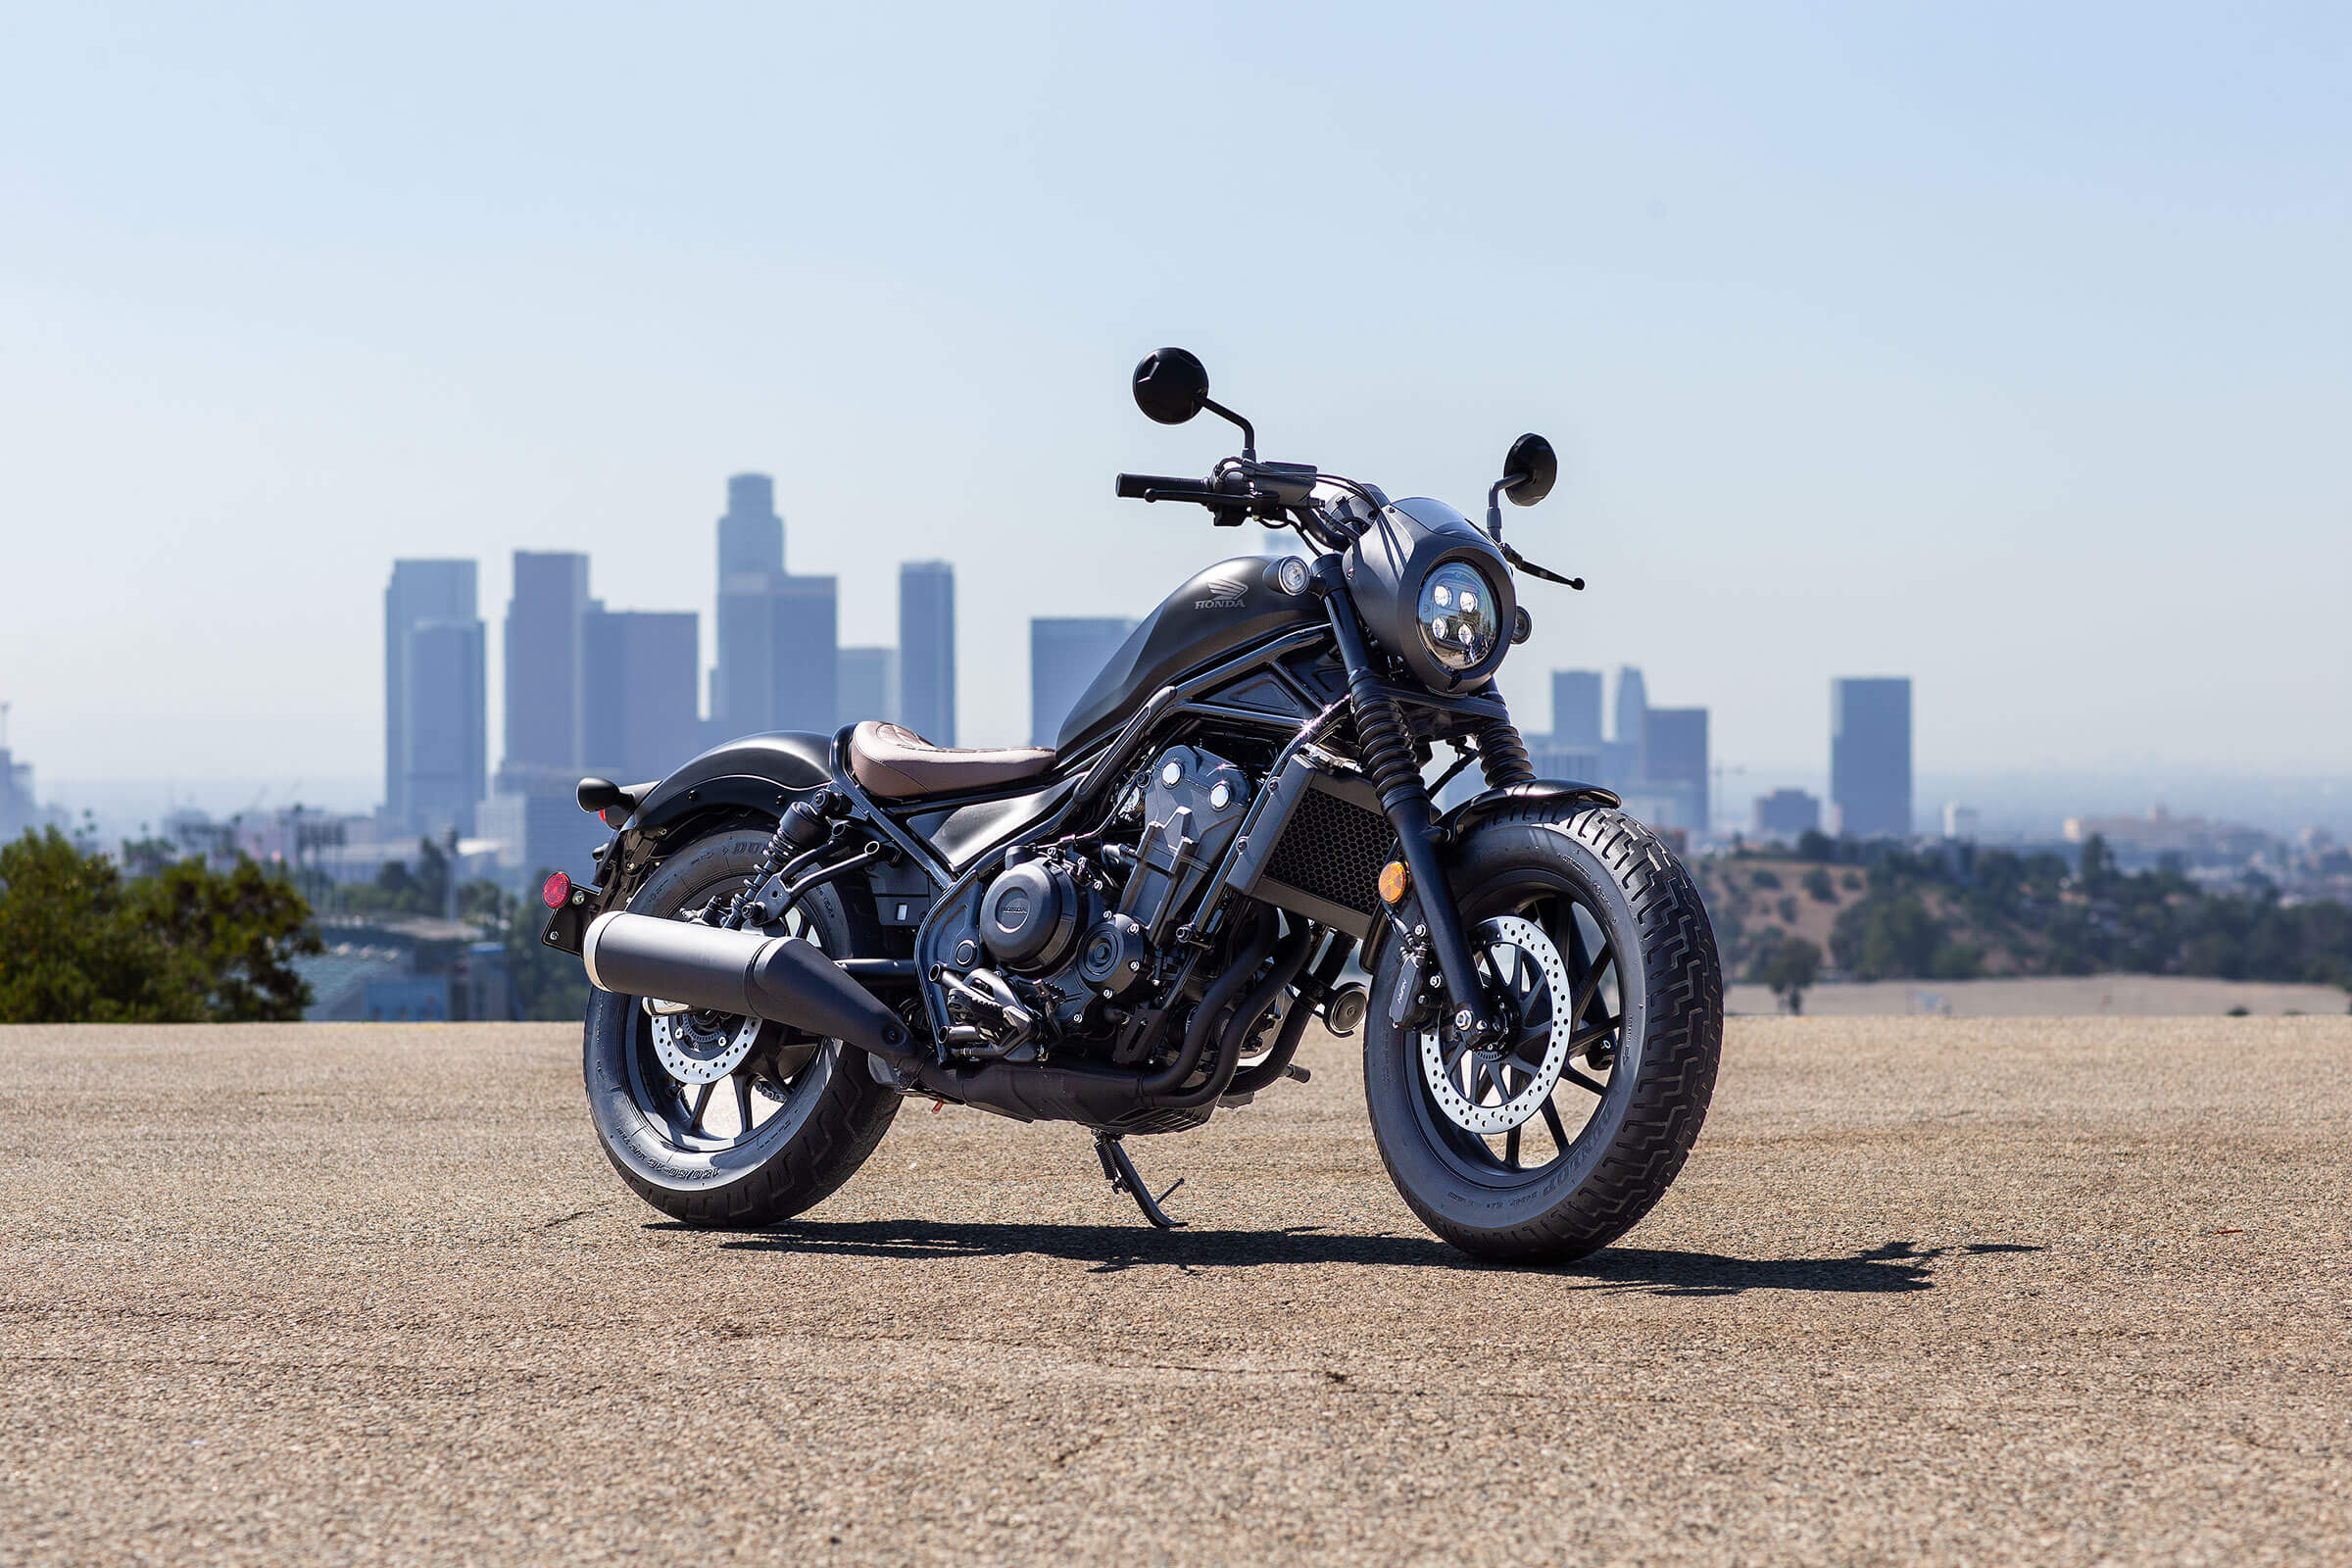 Static image of the 2022 Honda Rebel 500 with a cityscape in the background